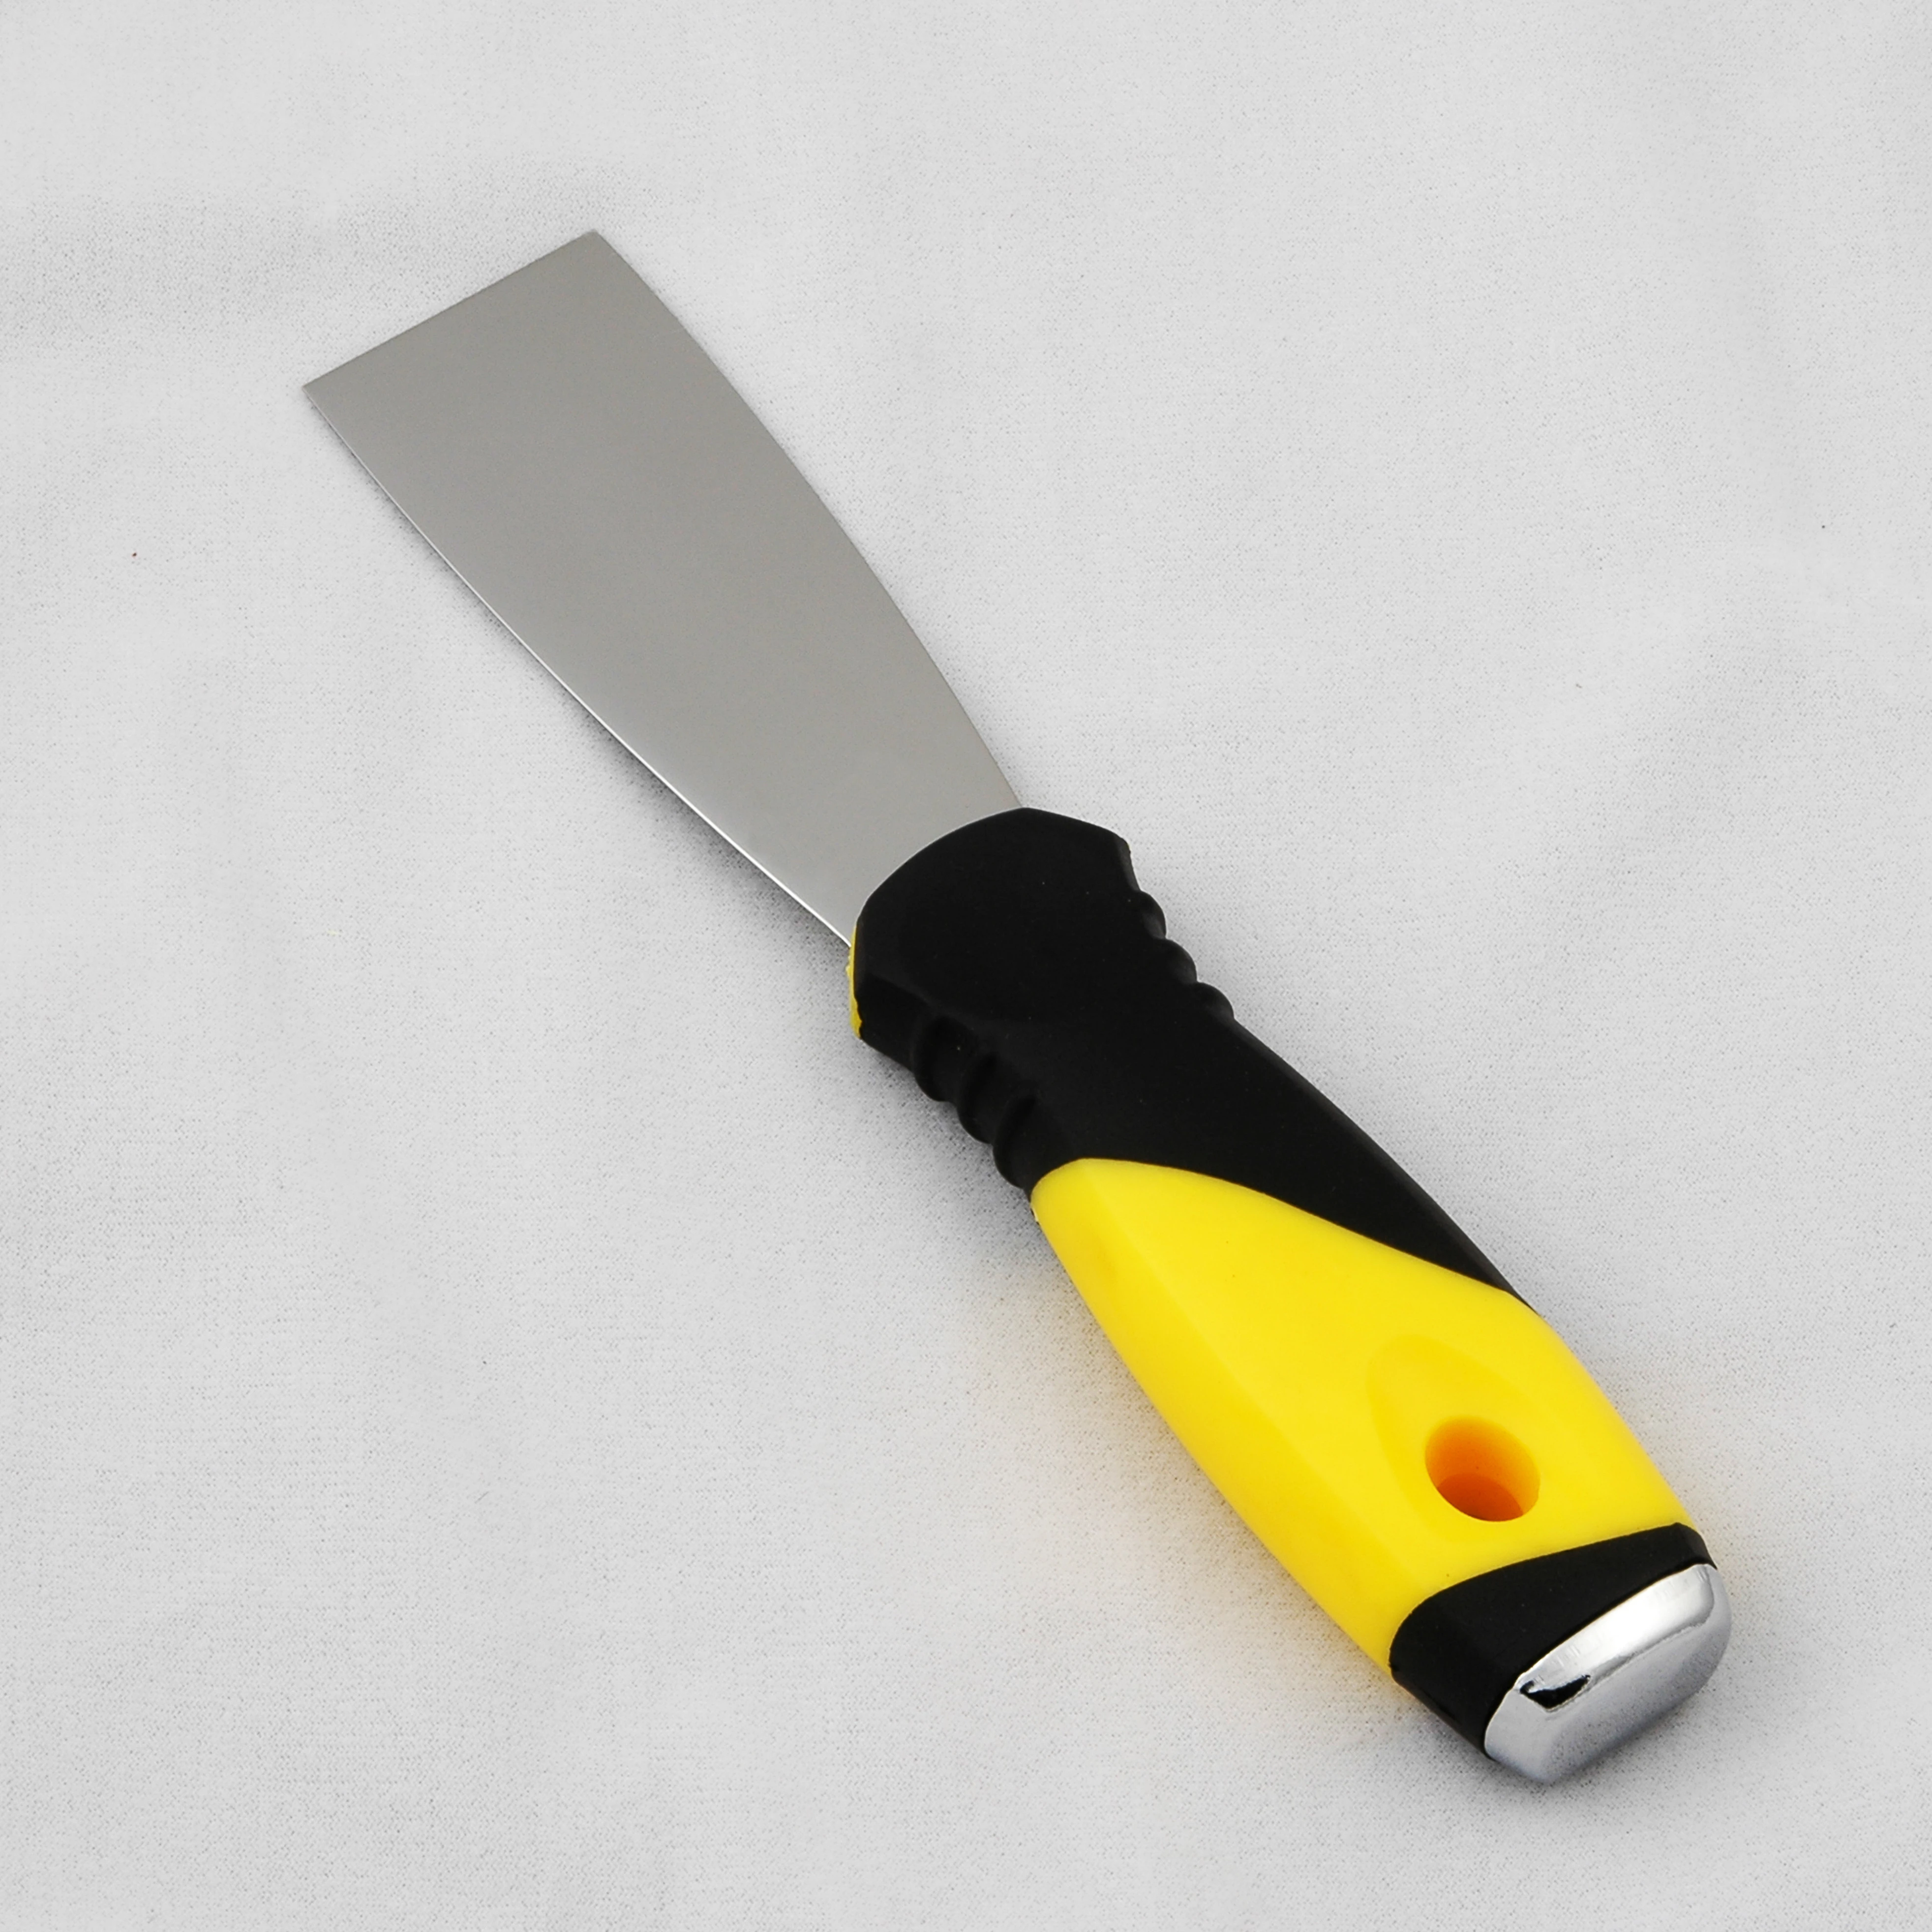 China High Quality Plastic Drywall Flat Tools Scraper Putty Knife With Pp&Tpr Handle